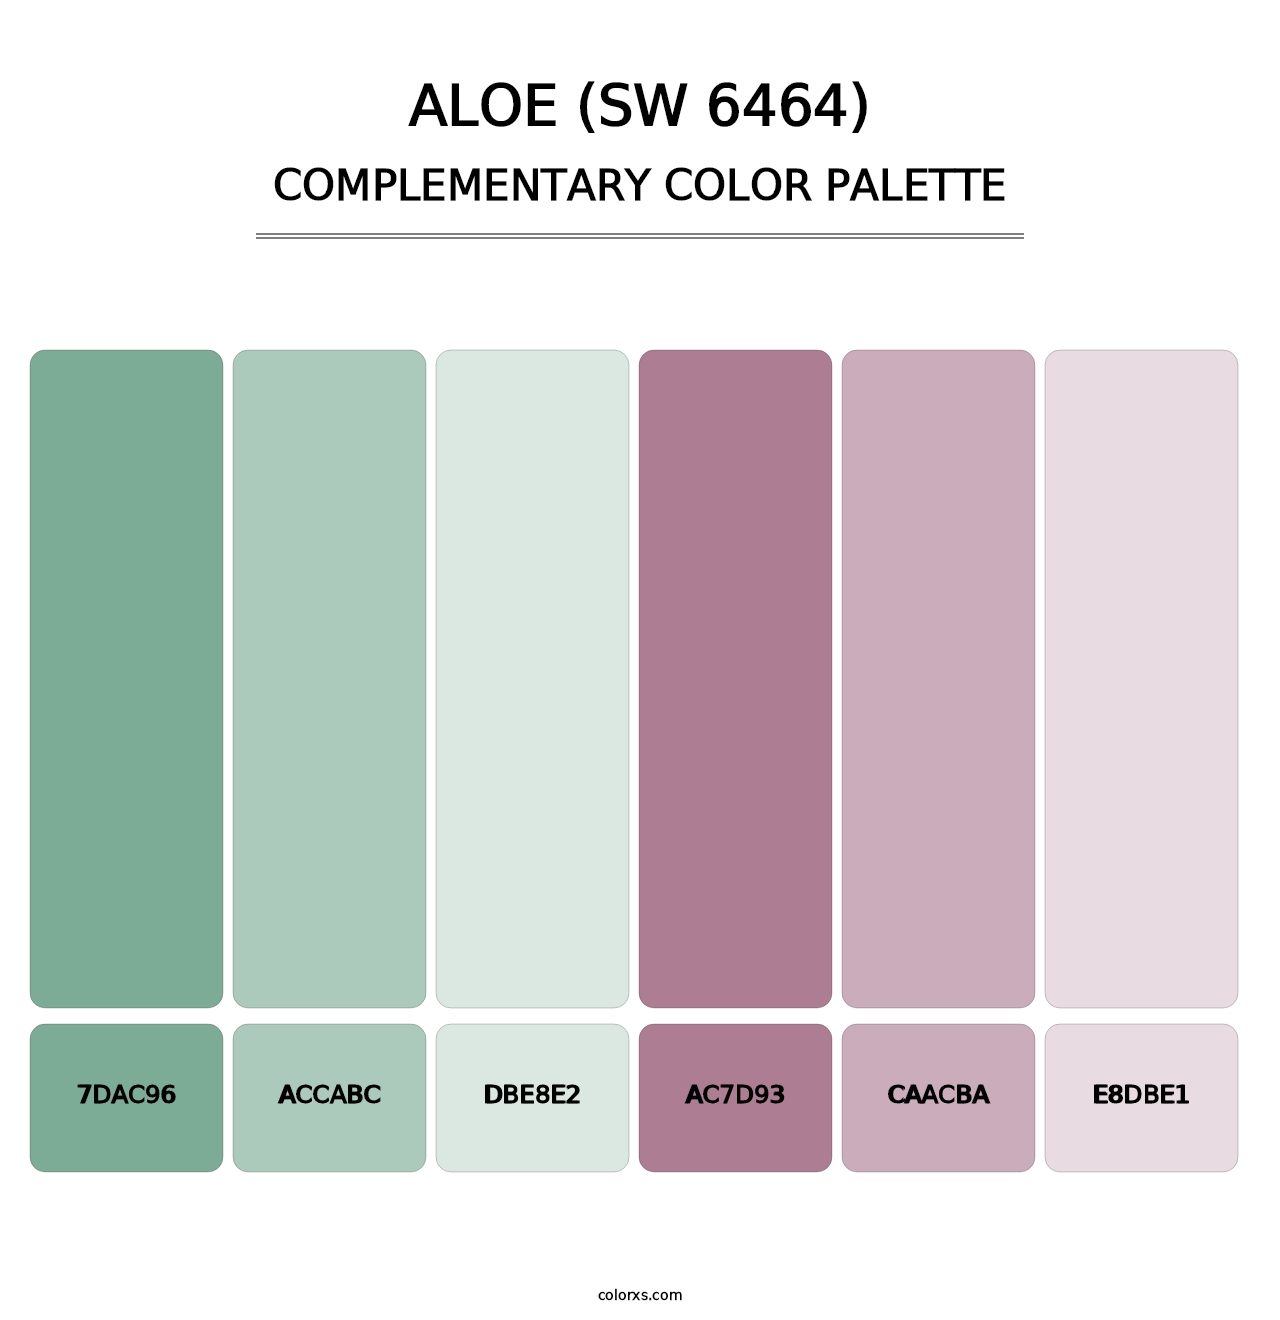 Aloe (SW 6464) - Complementary Color Palette